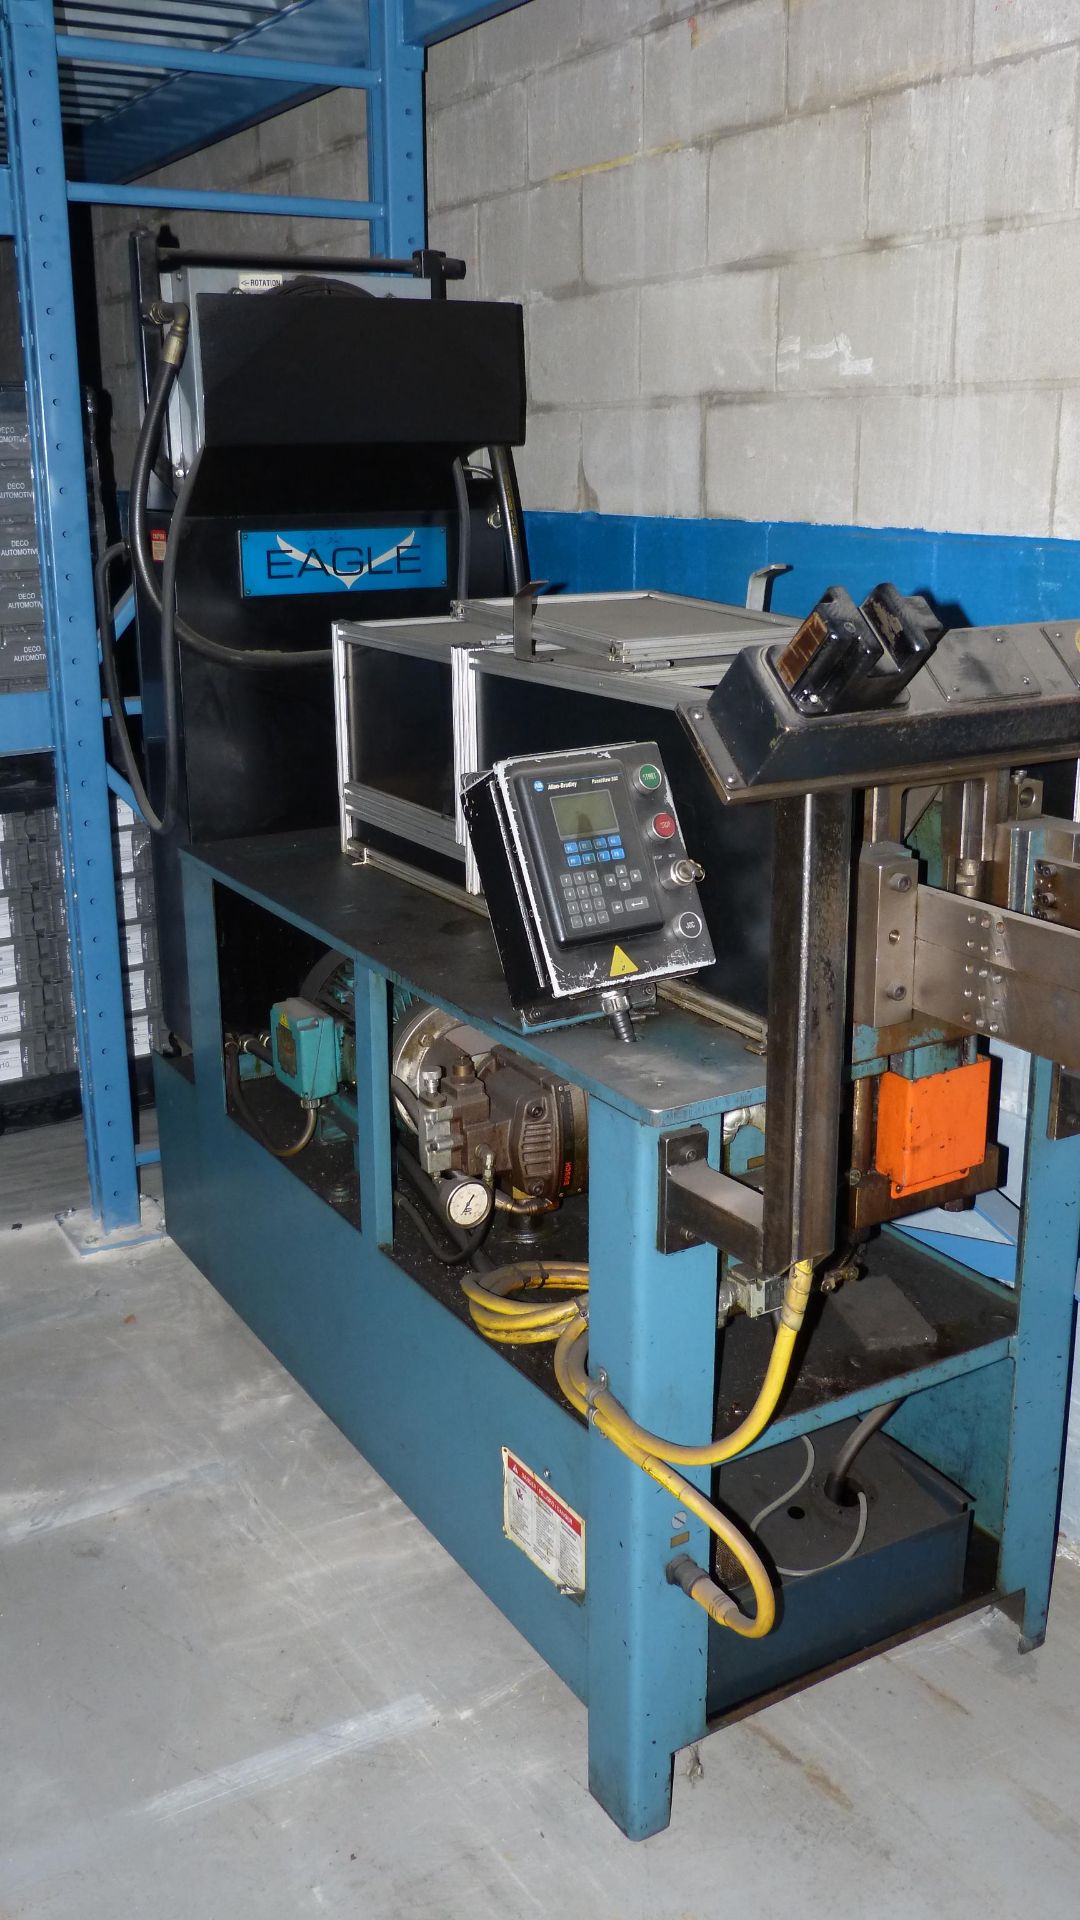 Eagle Model E 2000 Tube End Forming Machine for ID & OD Sizing, Tube Capacity 1" to 3.25", - Image 6 of 8